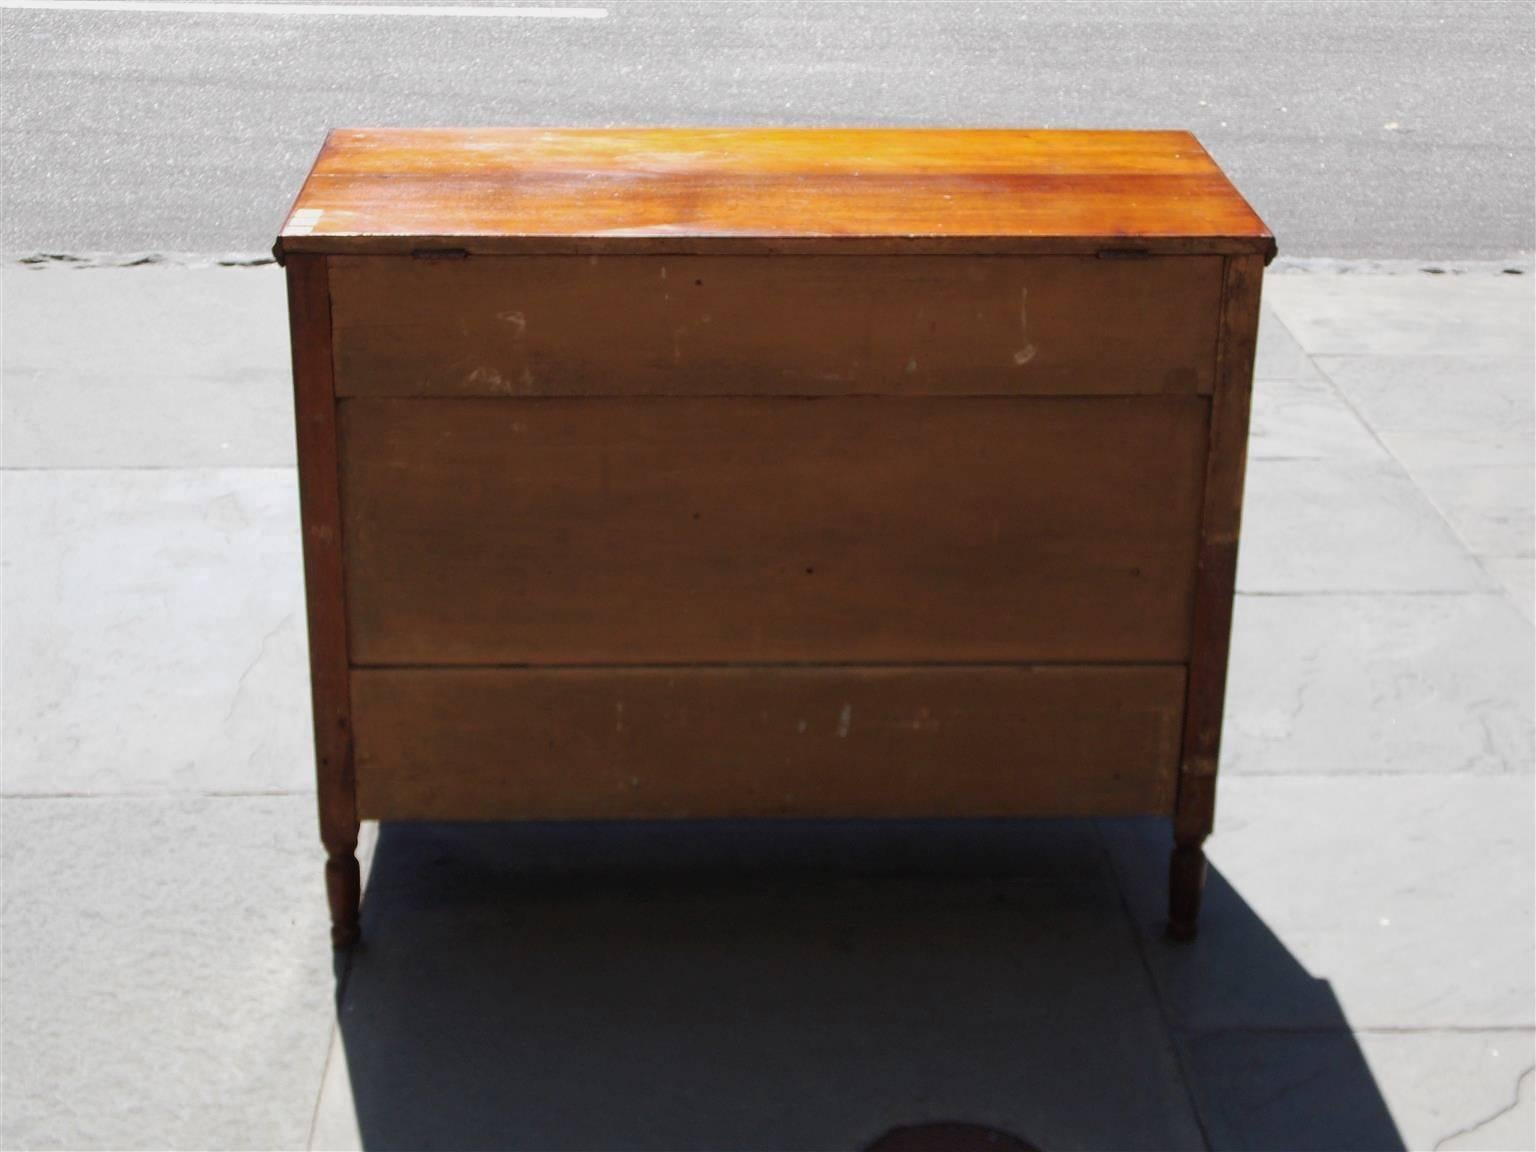 Early 19th Century American Walnut Hinged Top Compartmentalized Two Drawer Sugar Chest, Circa 1820